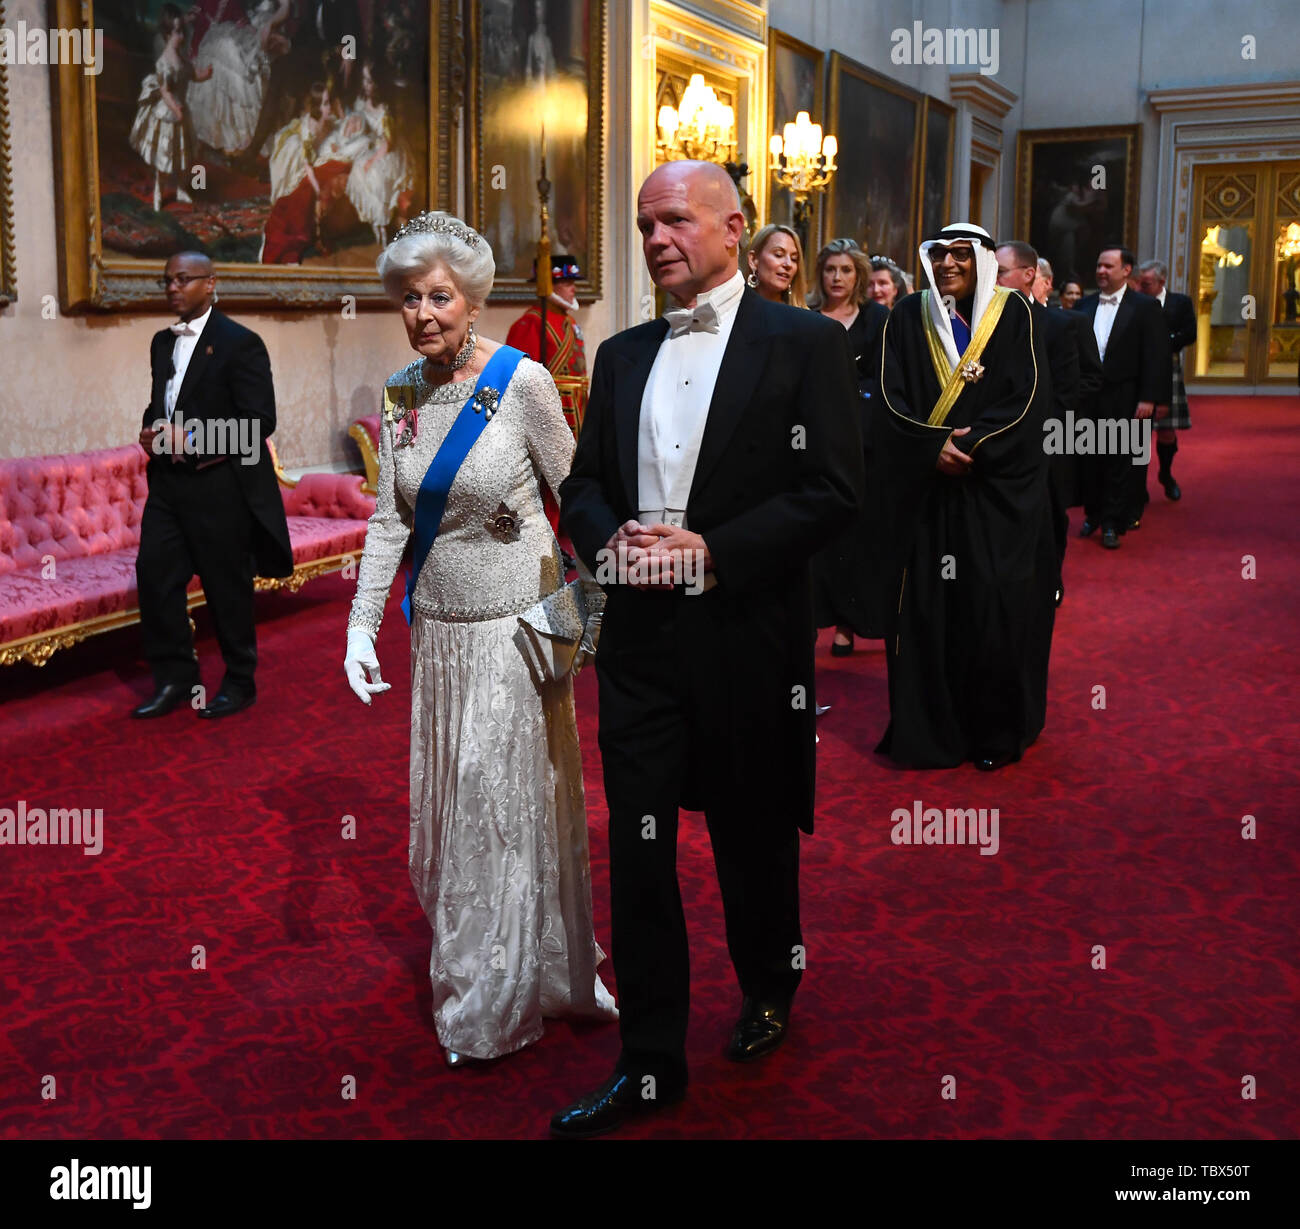 Princess Alexandra, The Honourable Lady Ogilvy and Lord Hague of Richmond arrive through the East Gallery during the State Banquet at Buckingham Palace, London, on day one of the US President's three day state visit to the UK. Stock Photo